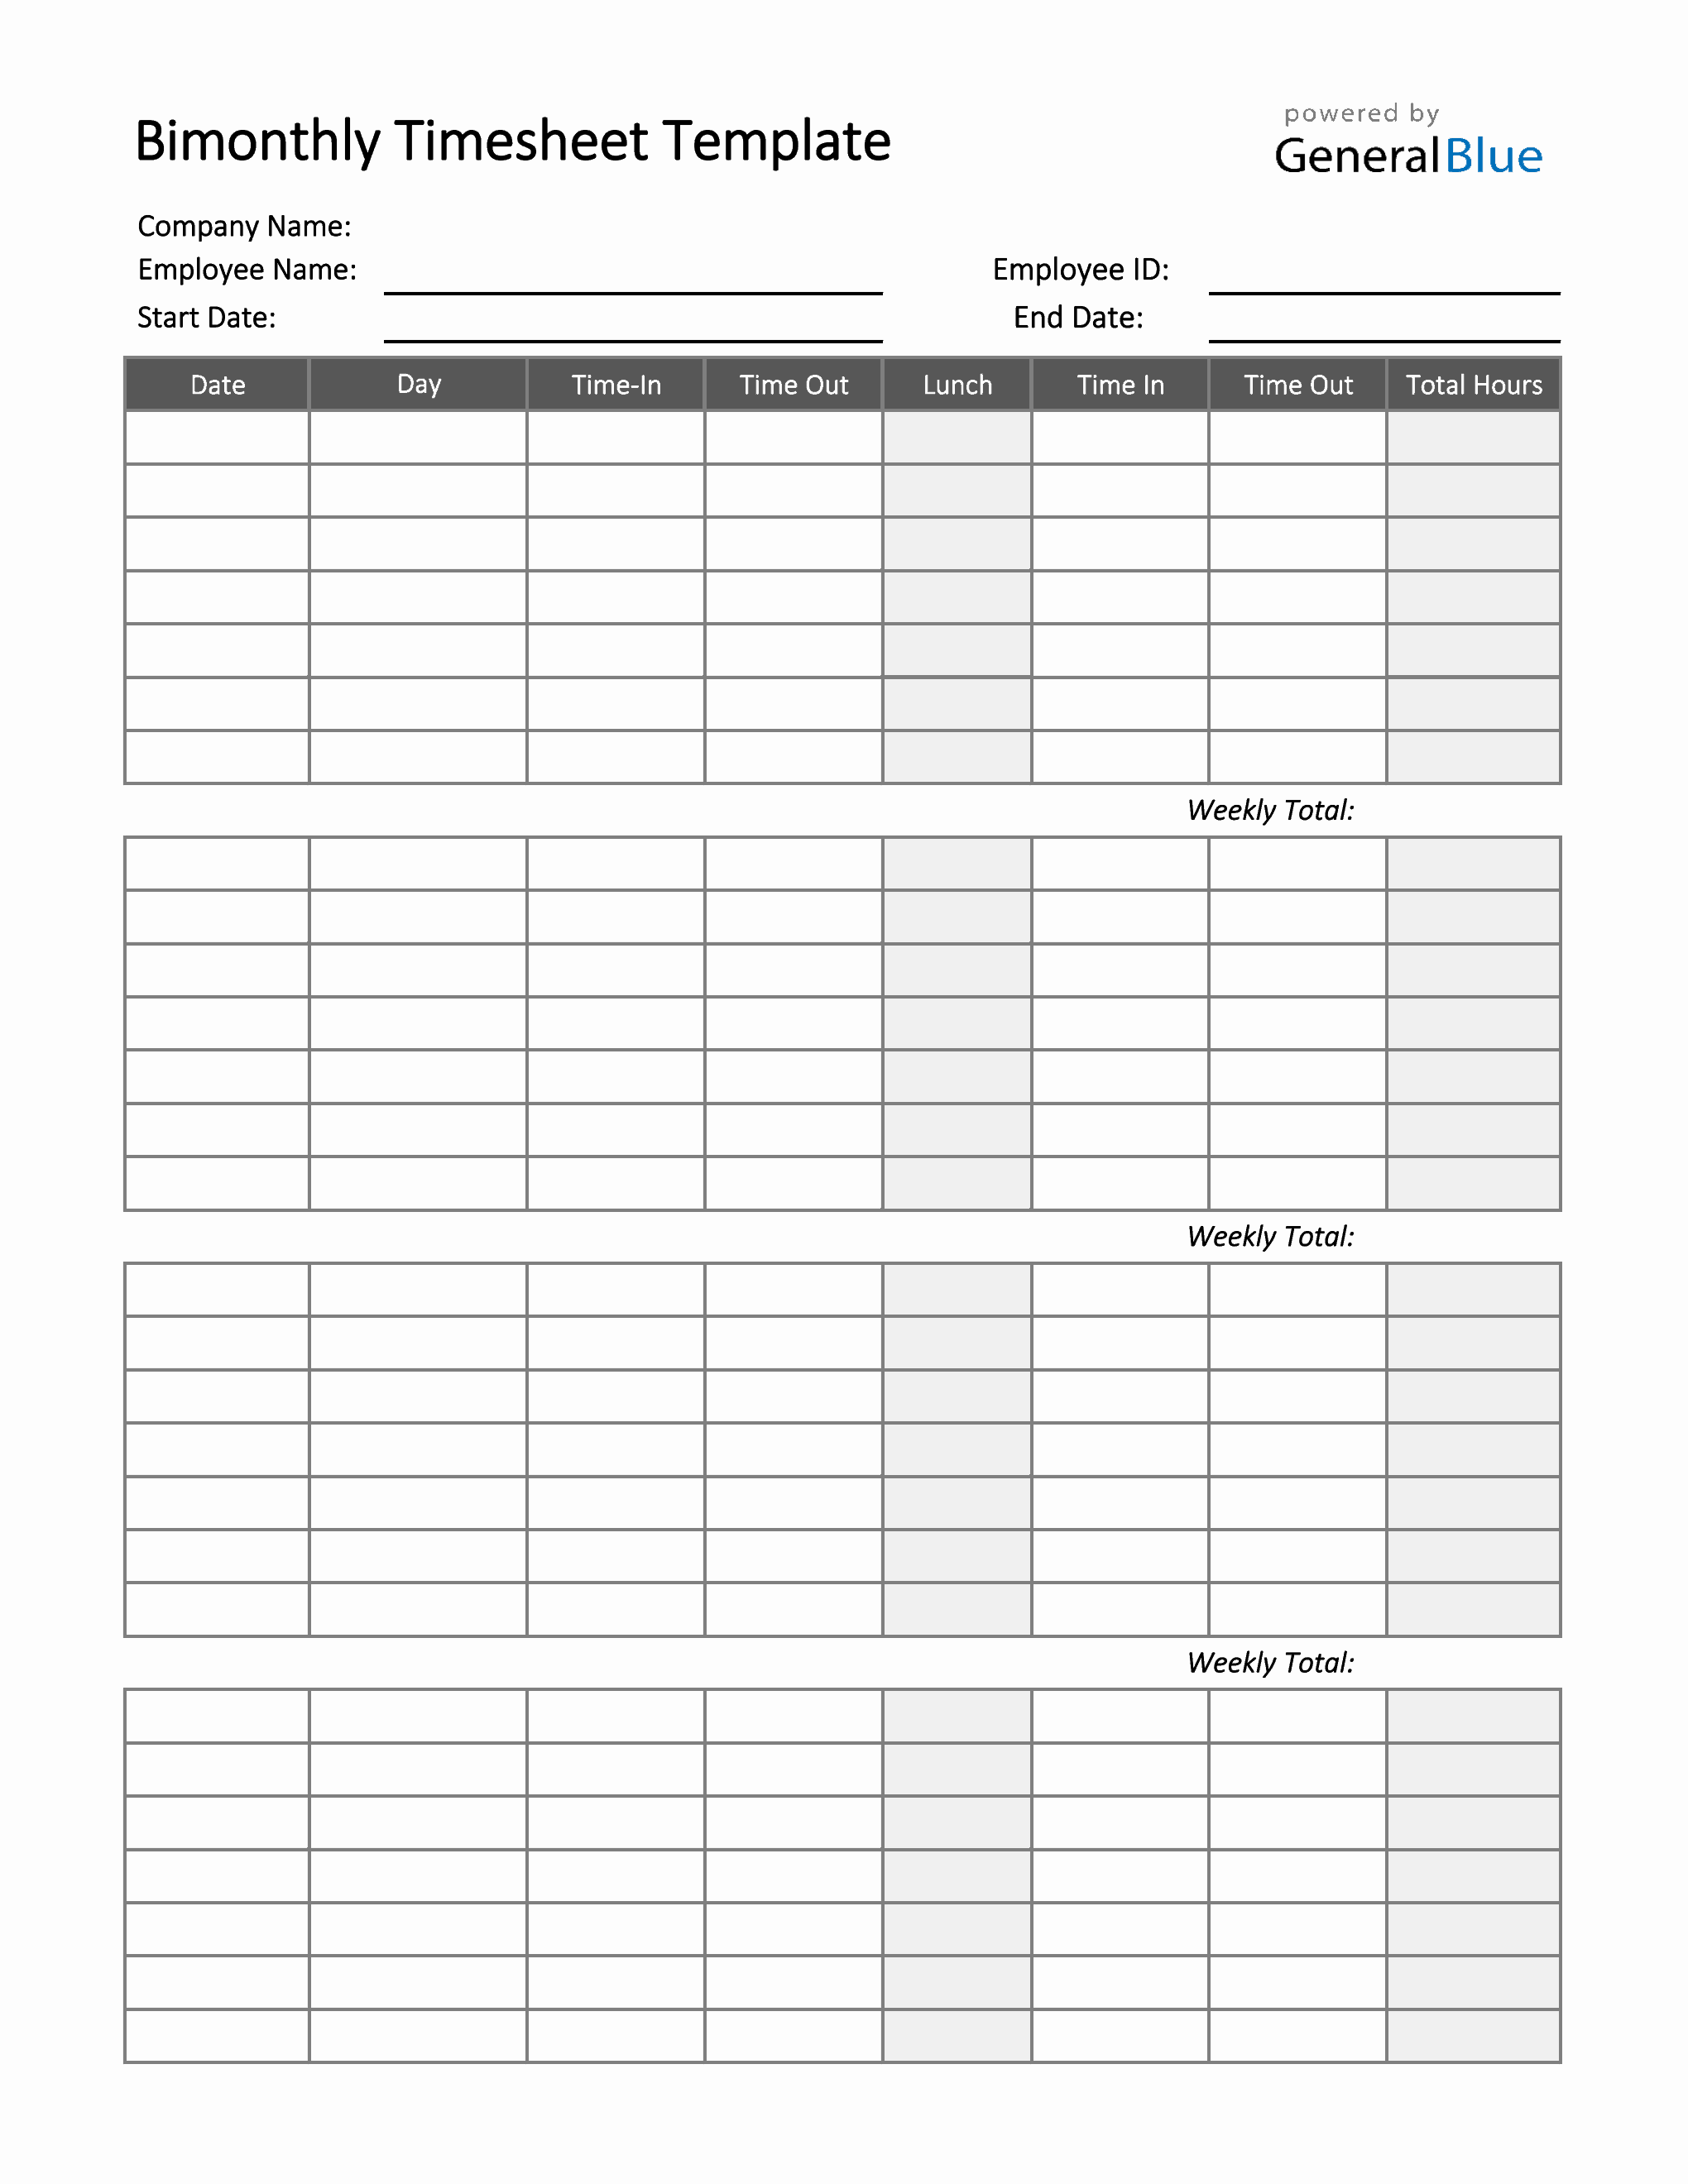 Bimonthly Timesheet Template in Excel Intended For Timesheet Invoice Template Excel